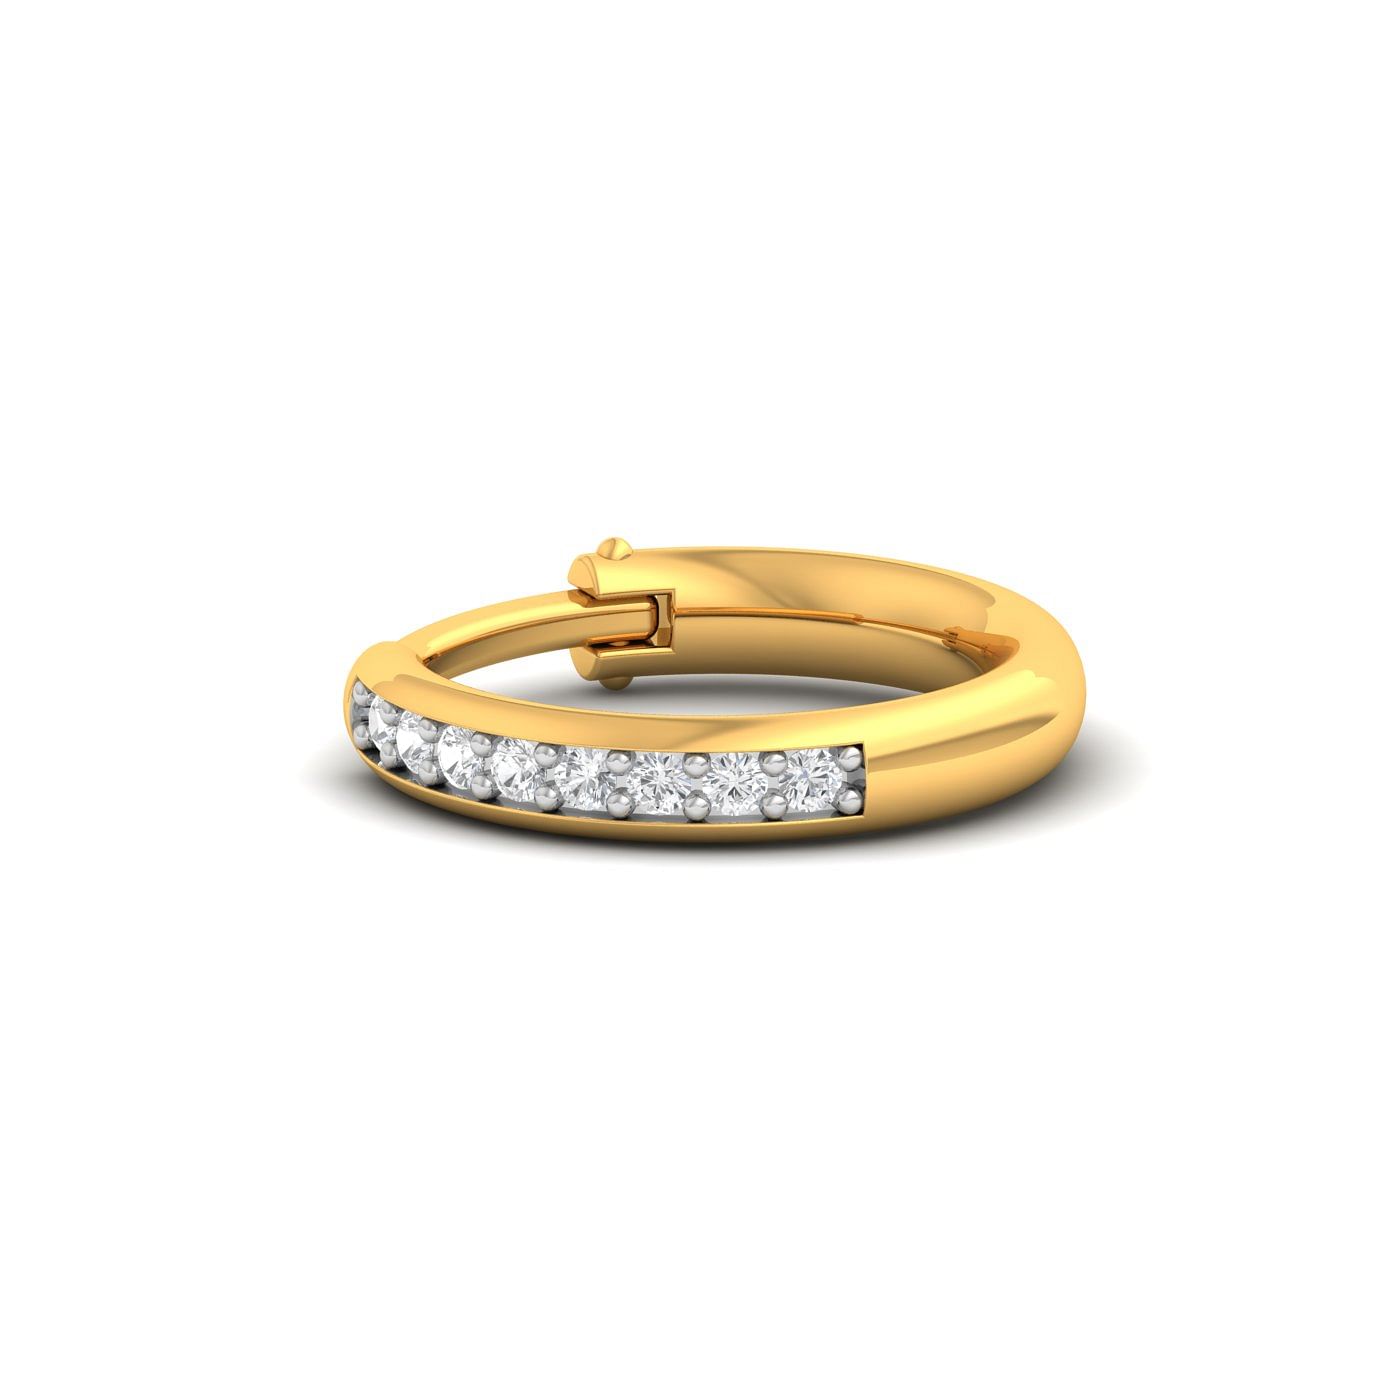 Bezel Setting Diamond Nose Ring With Yellow Gold